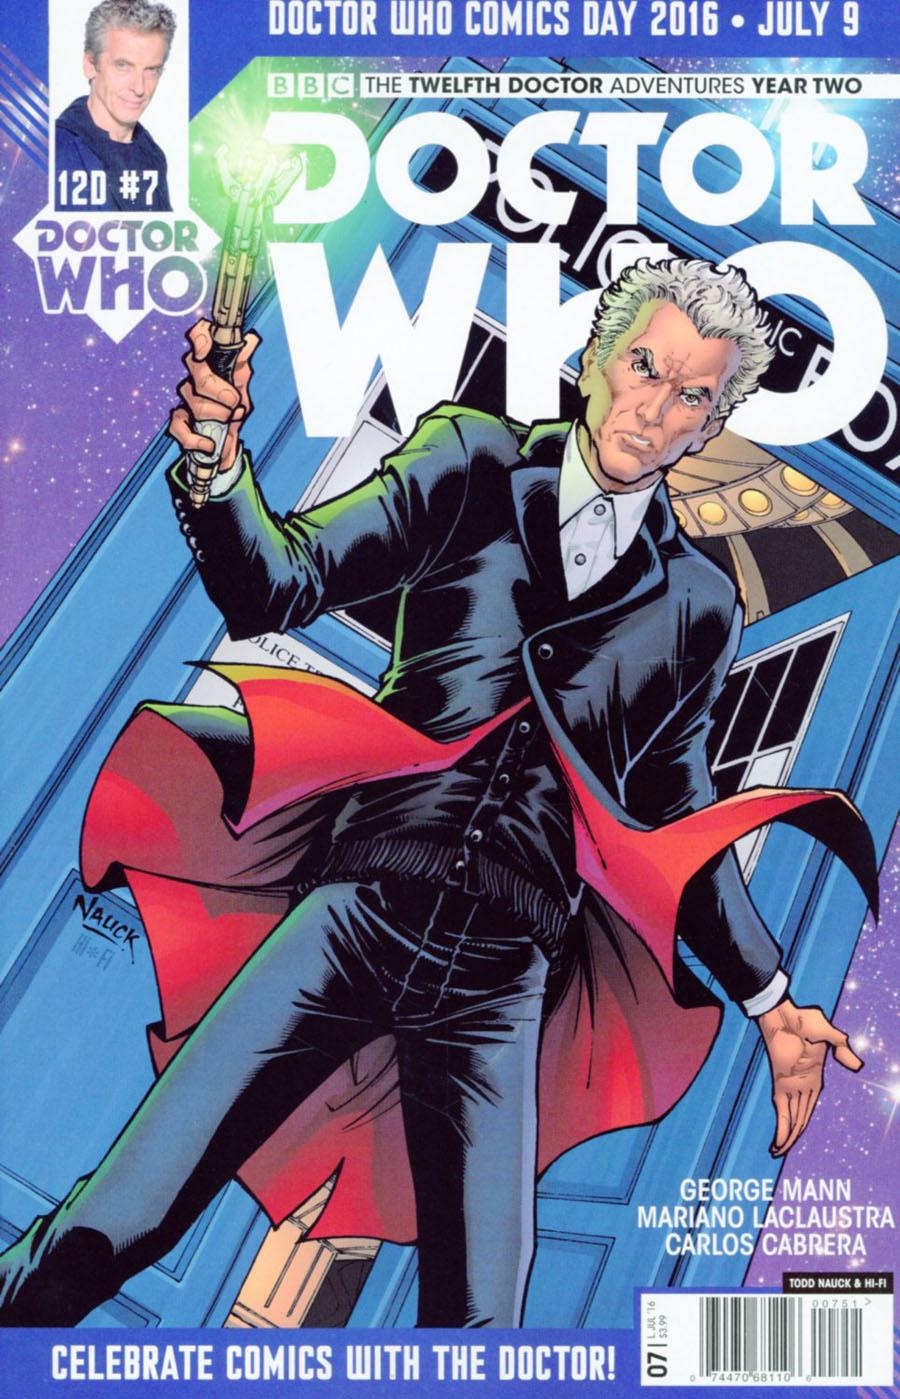 Doctor Who 12th Doctor Year Two Vol. 1 #9